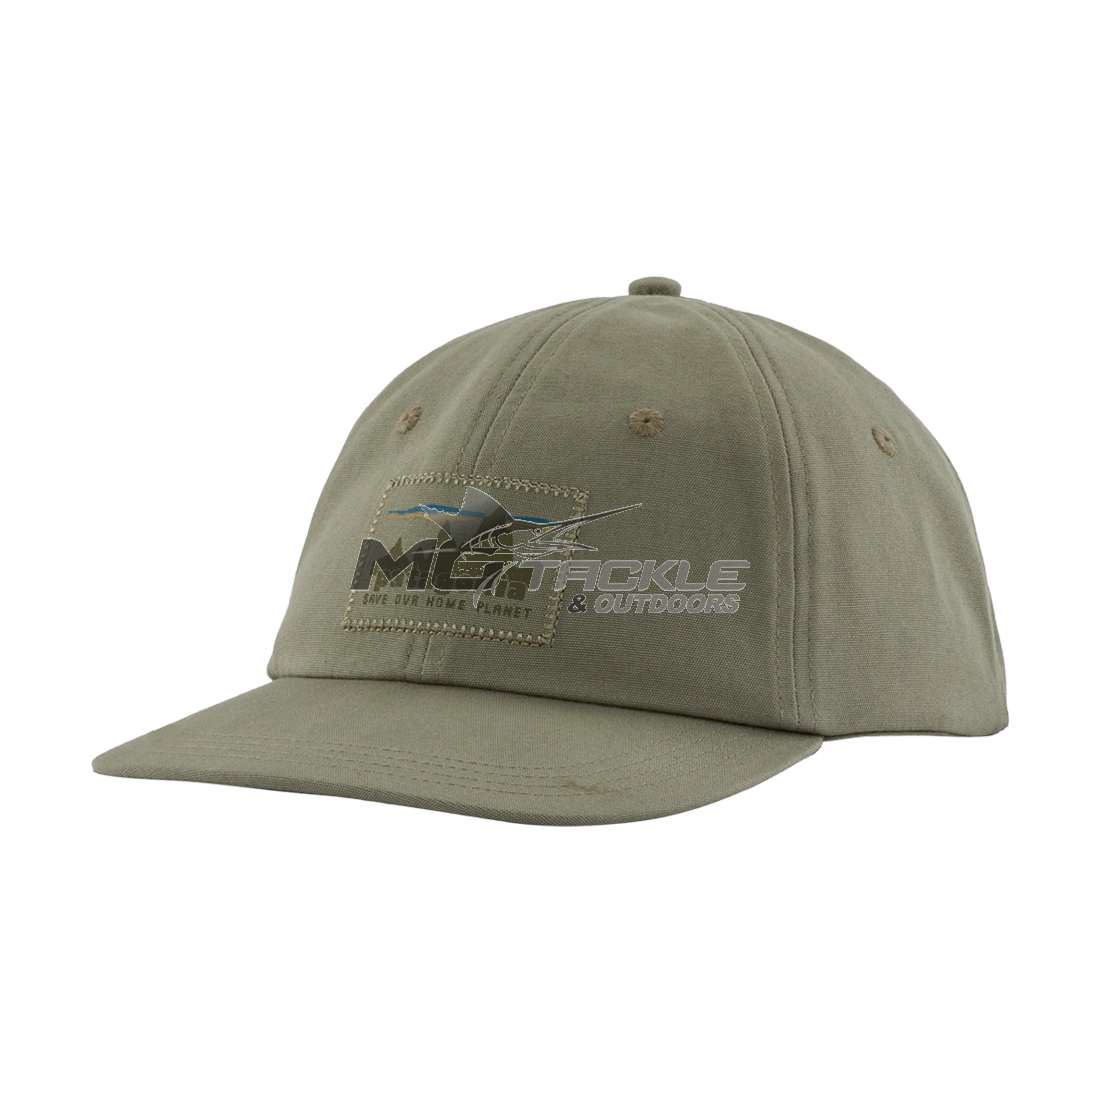 Patagonia Take A Stand Trucker Hat, Buy Patagonia Fly Fishing Hats, Recycled Fishing Hats